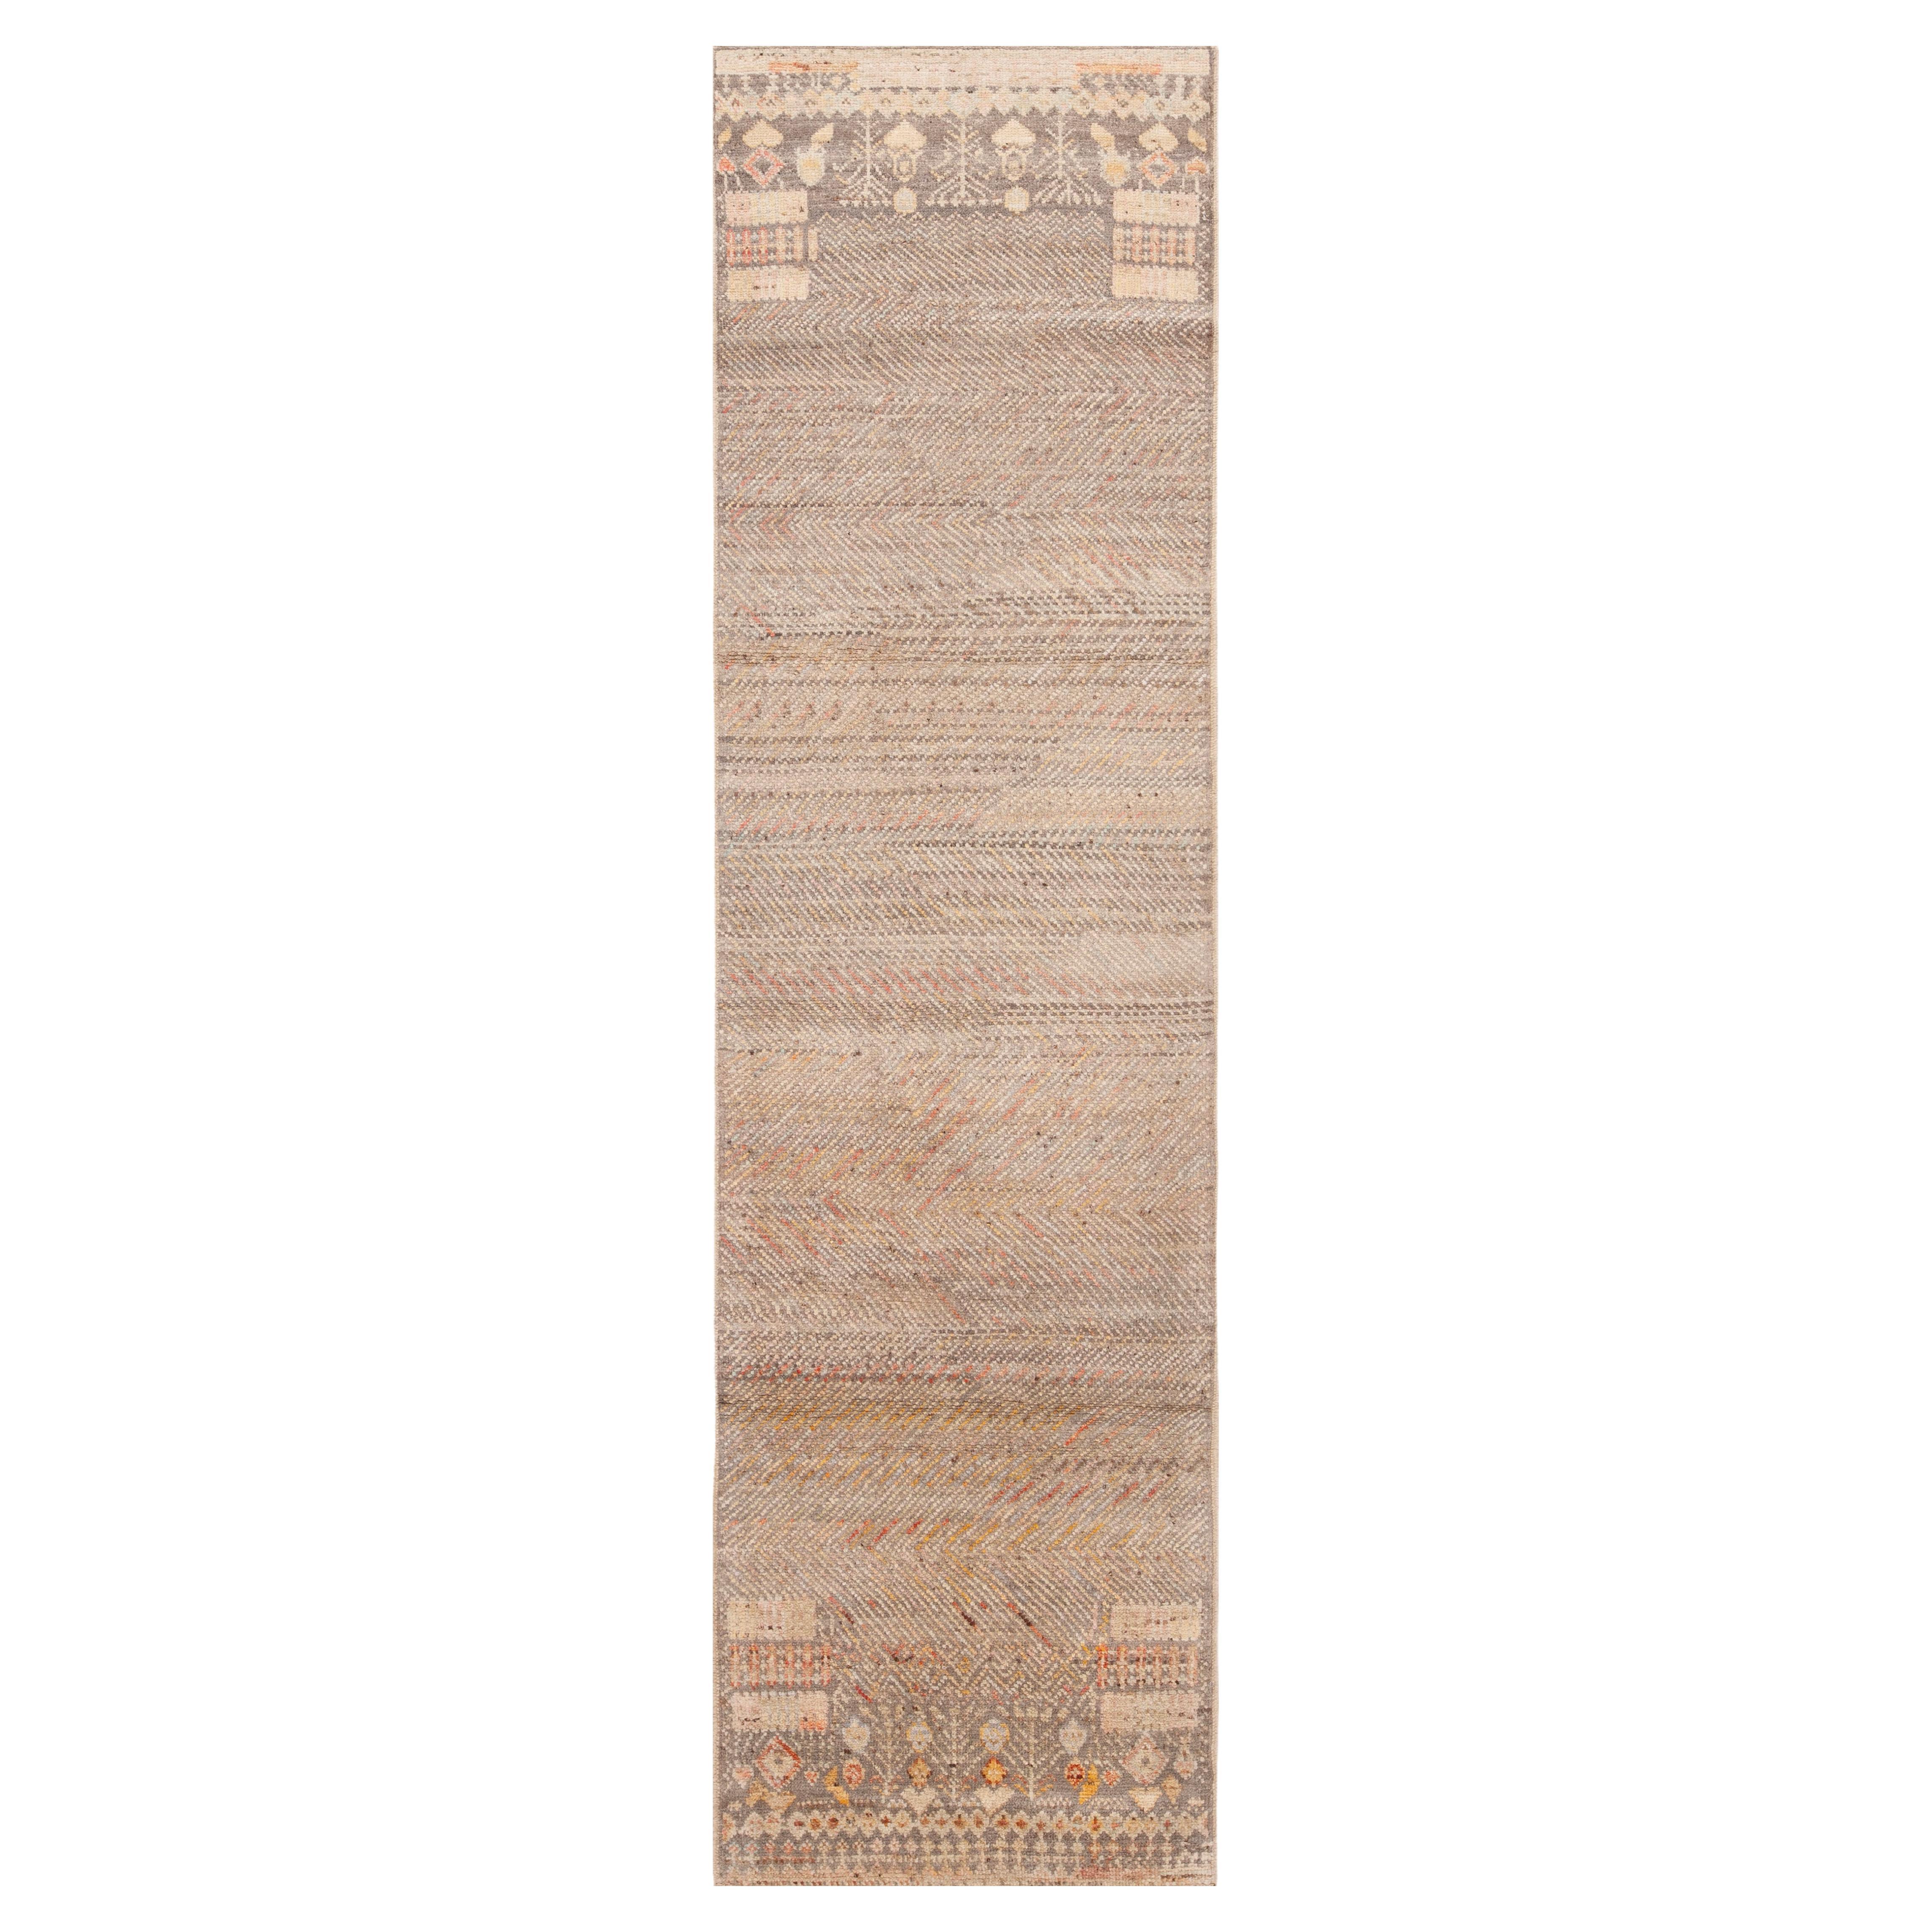 Nazmiyal Collection Tribal Geometric Neutral Grey Modern Runner Rug 2'8" x 9'8" For Sale